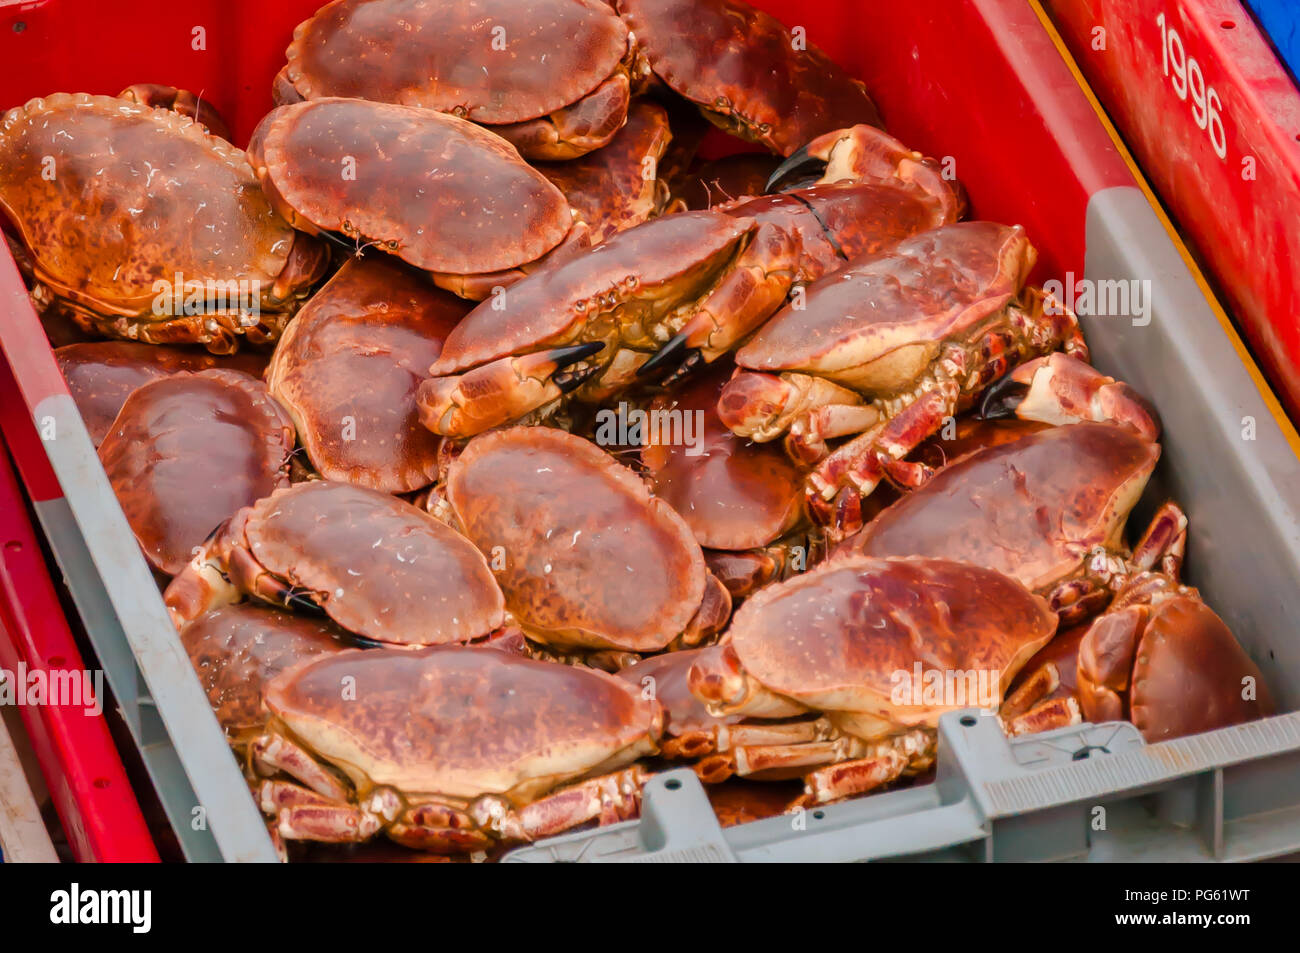 Hauls of crabs in boxes Stock Photo